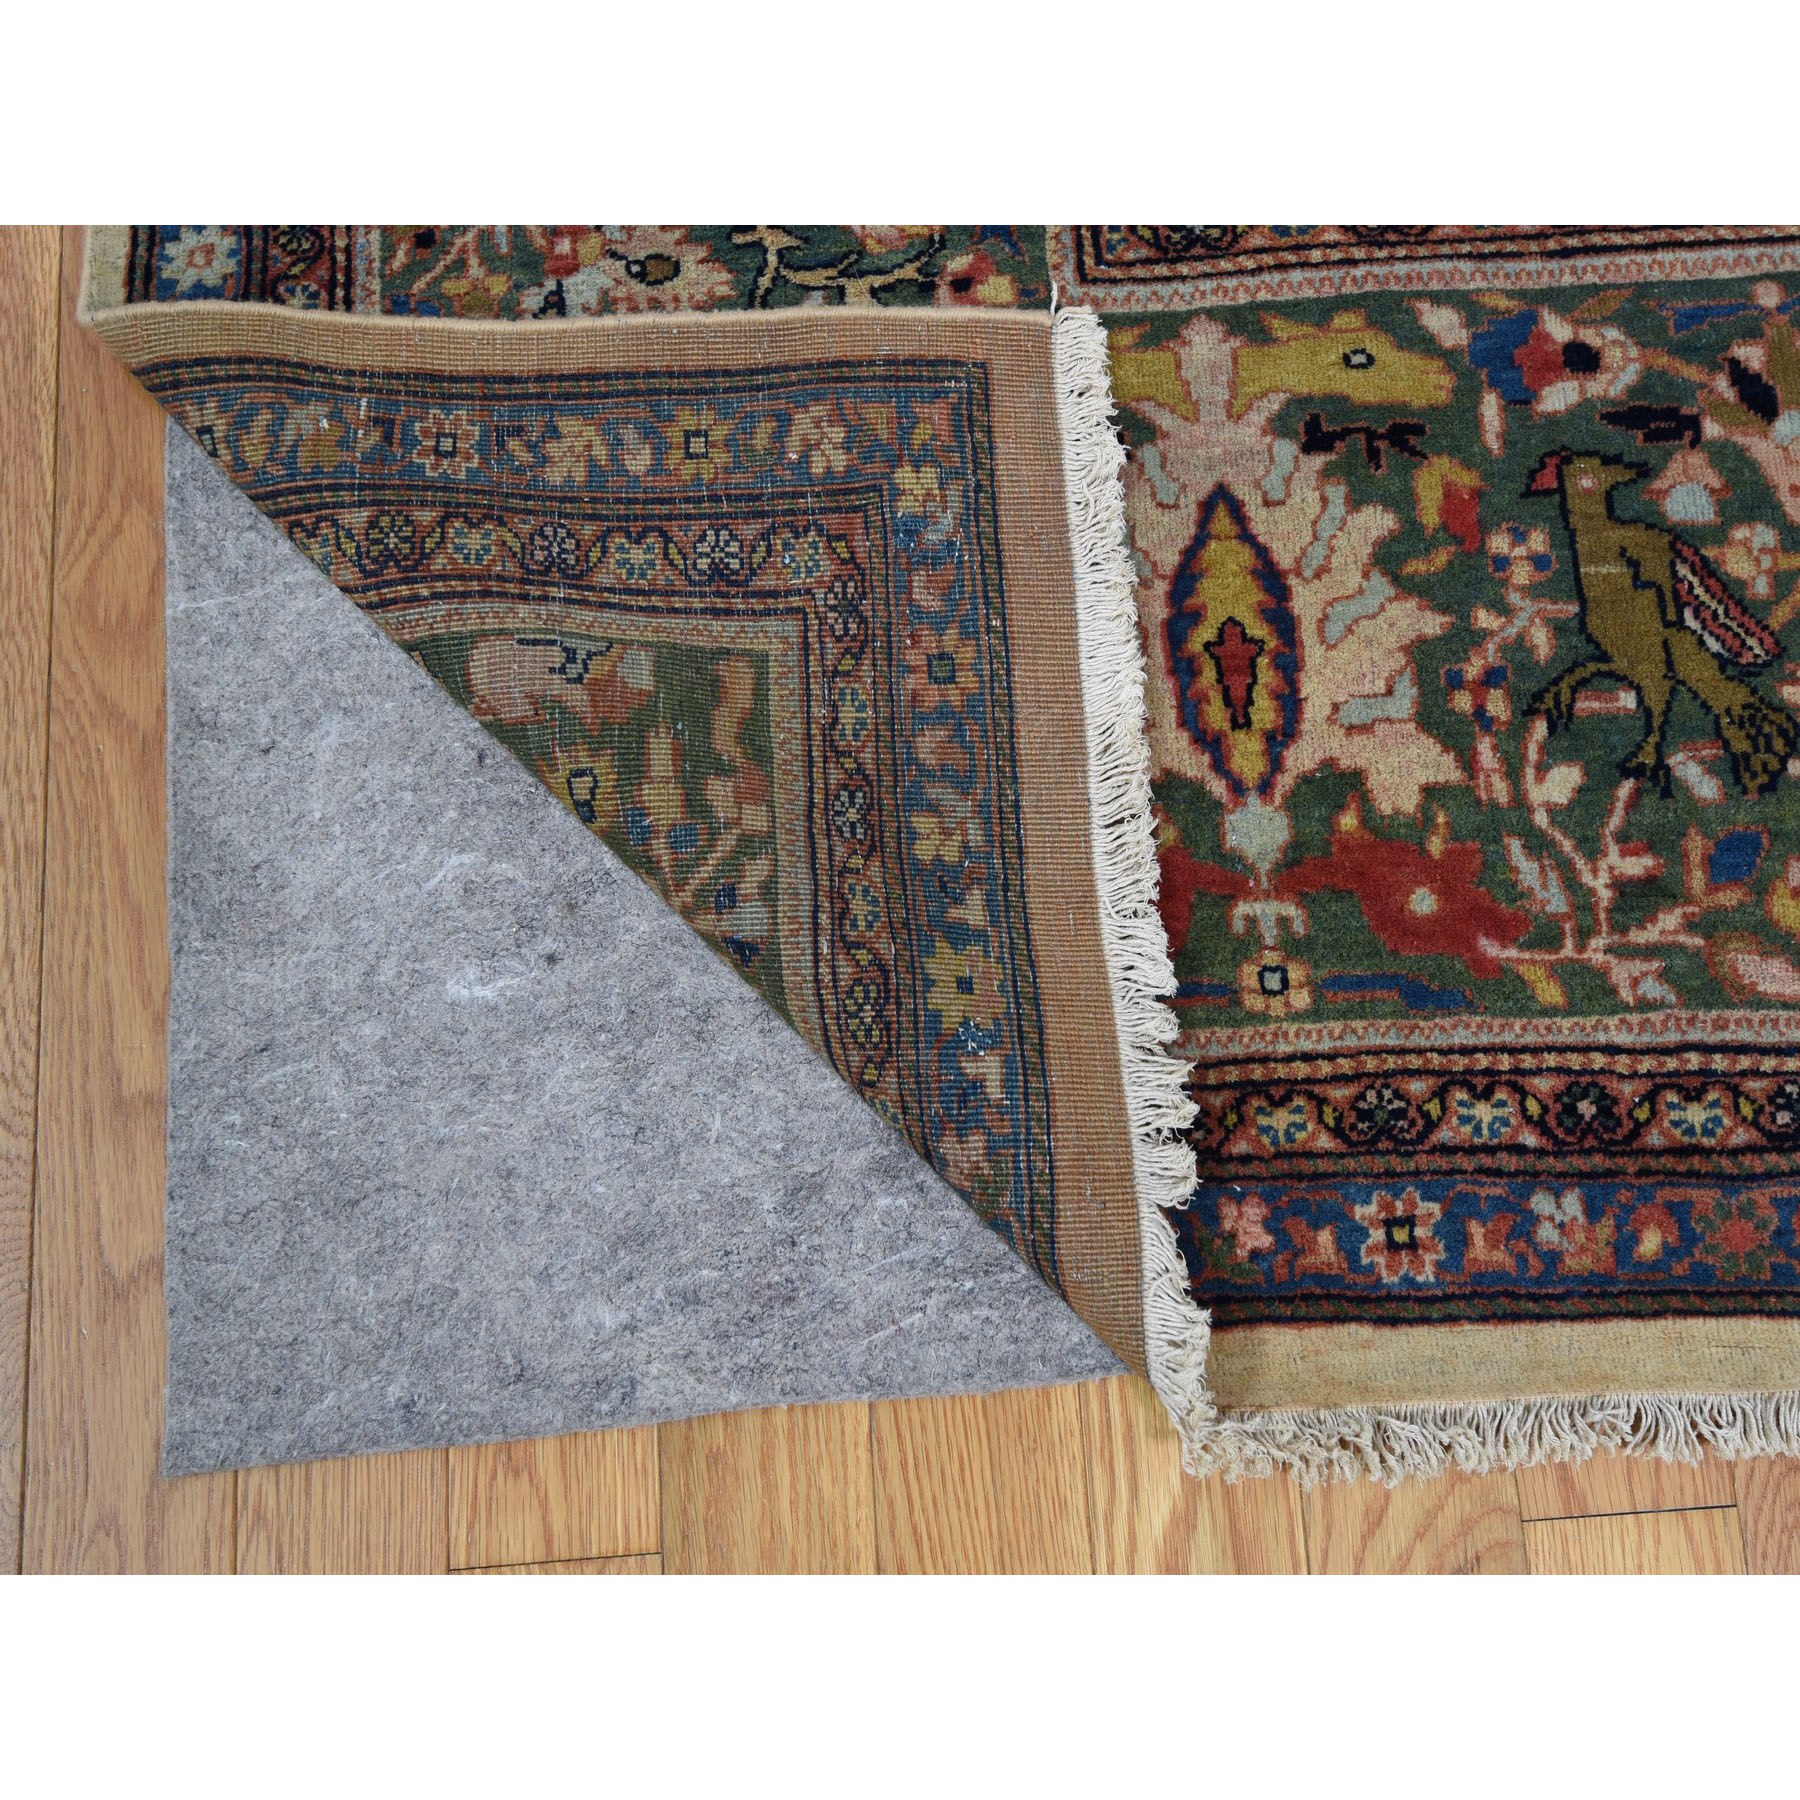 12'2"x18'8" Oversized Antique Persian Sarouk Fereghan With Birds Full Pile And Soft Hand Woven Oriental Rug 